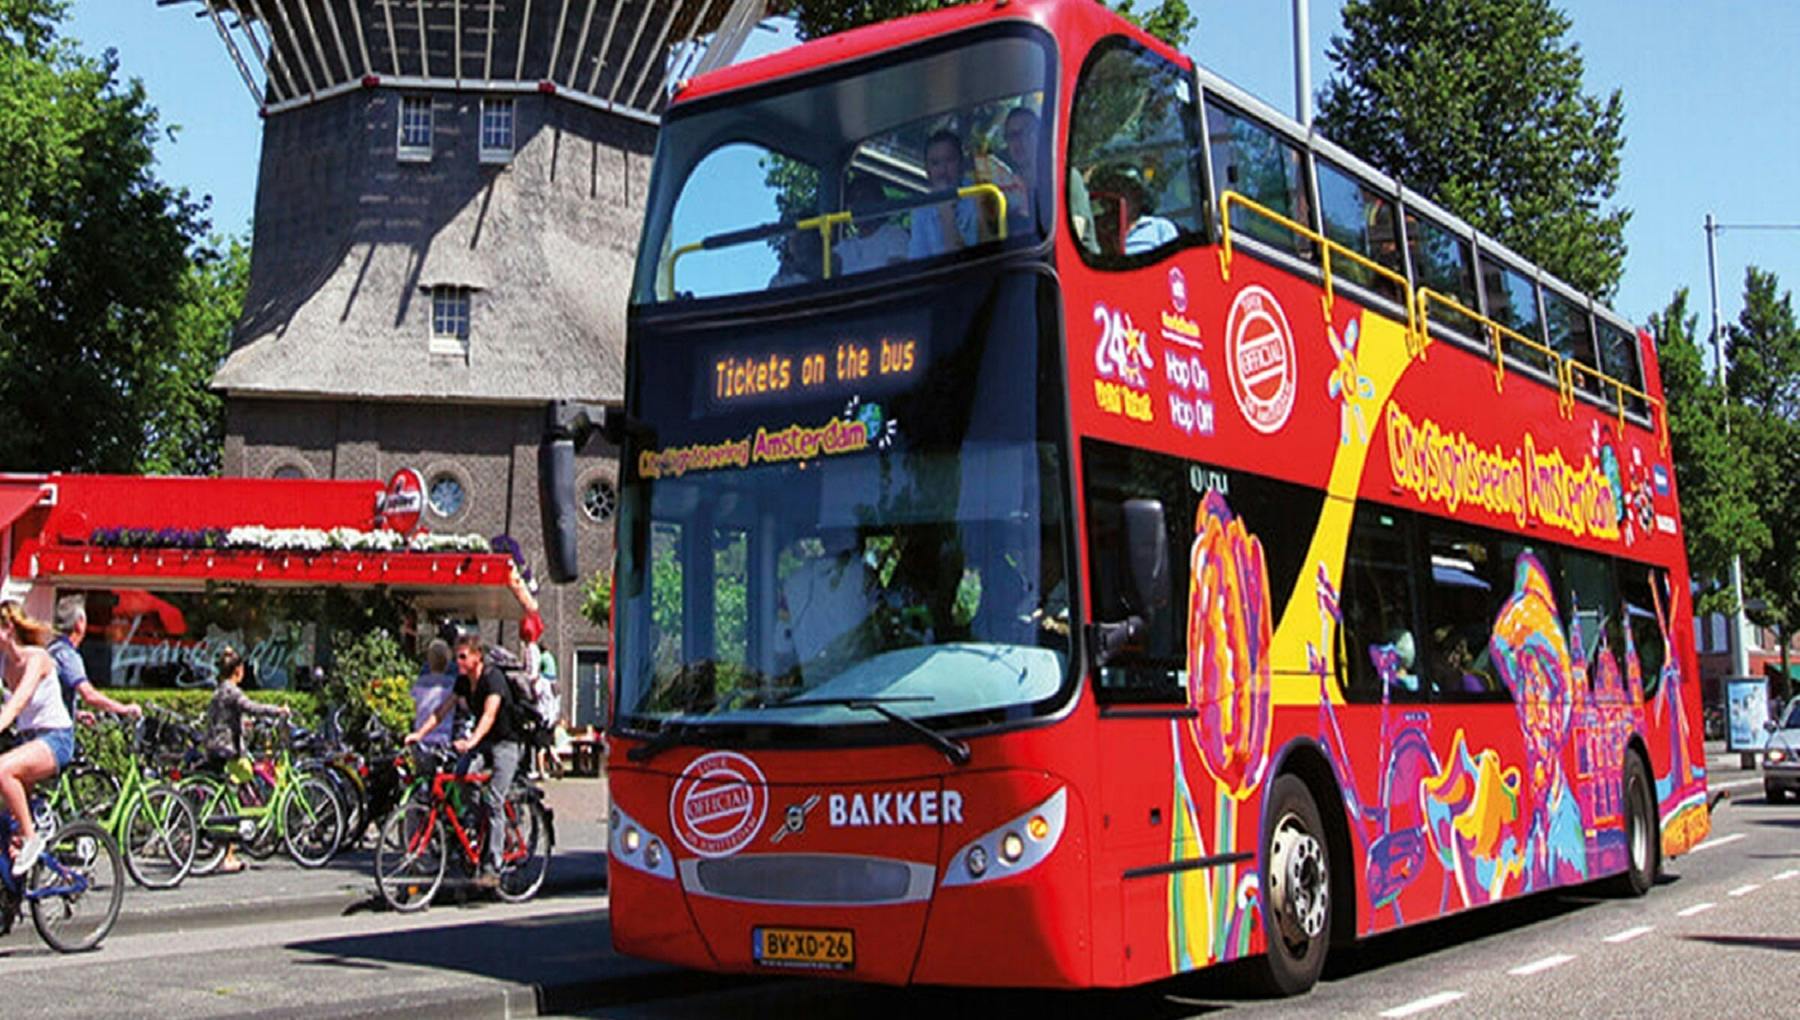 City Sightseeing Amsterdam  - Hop On Hop Off bus 24 hrs